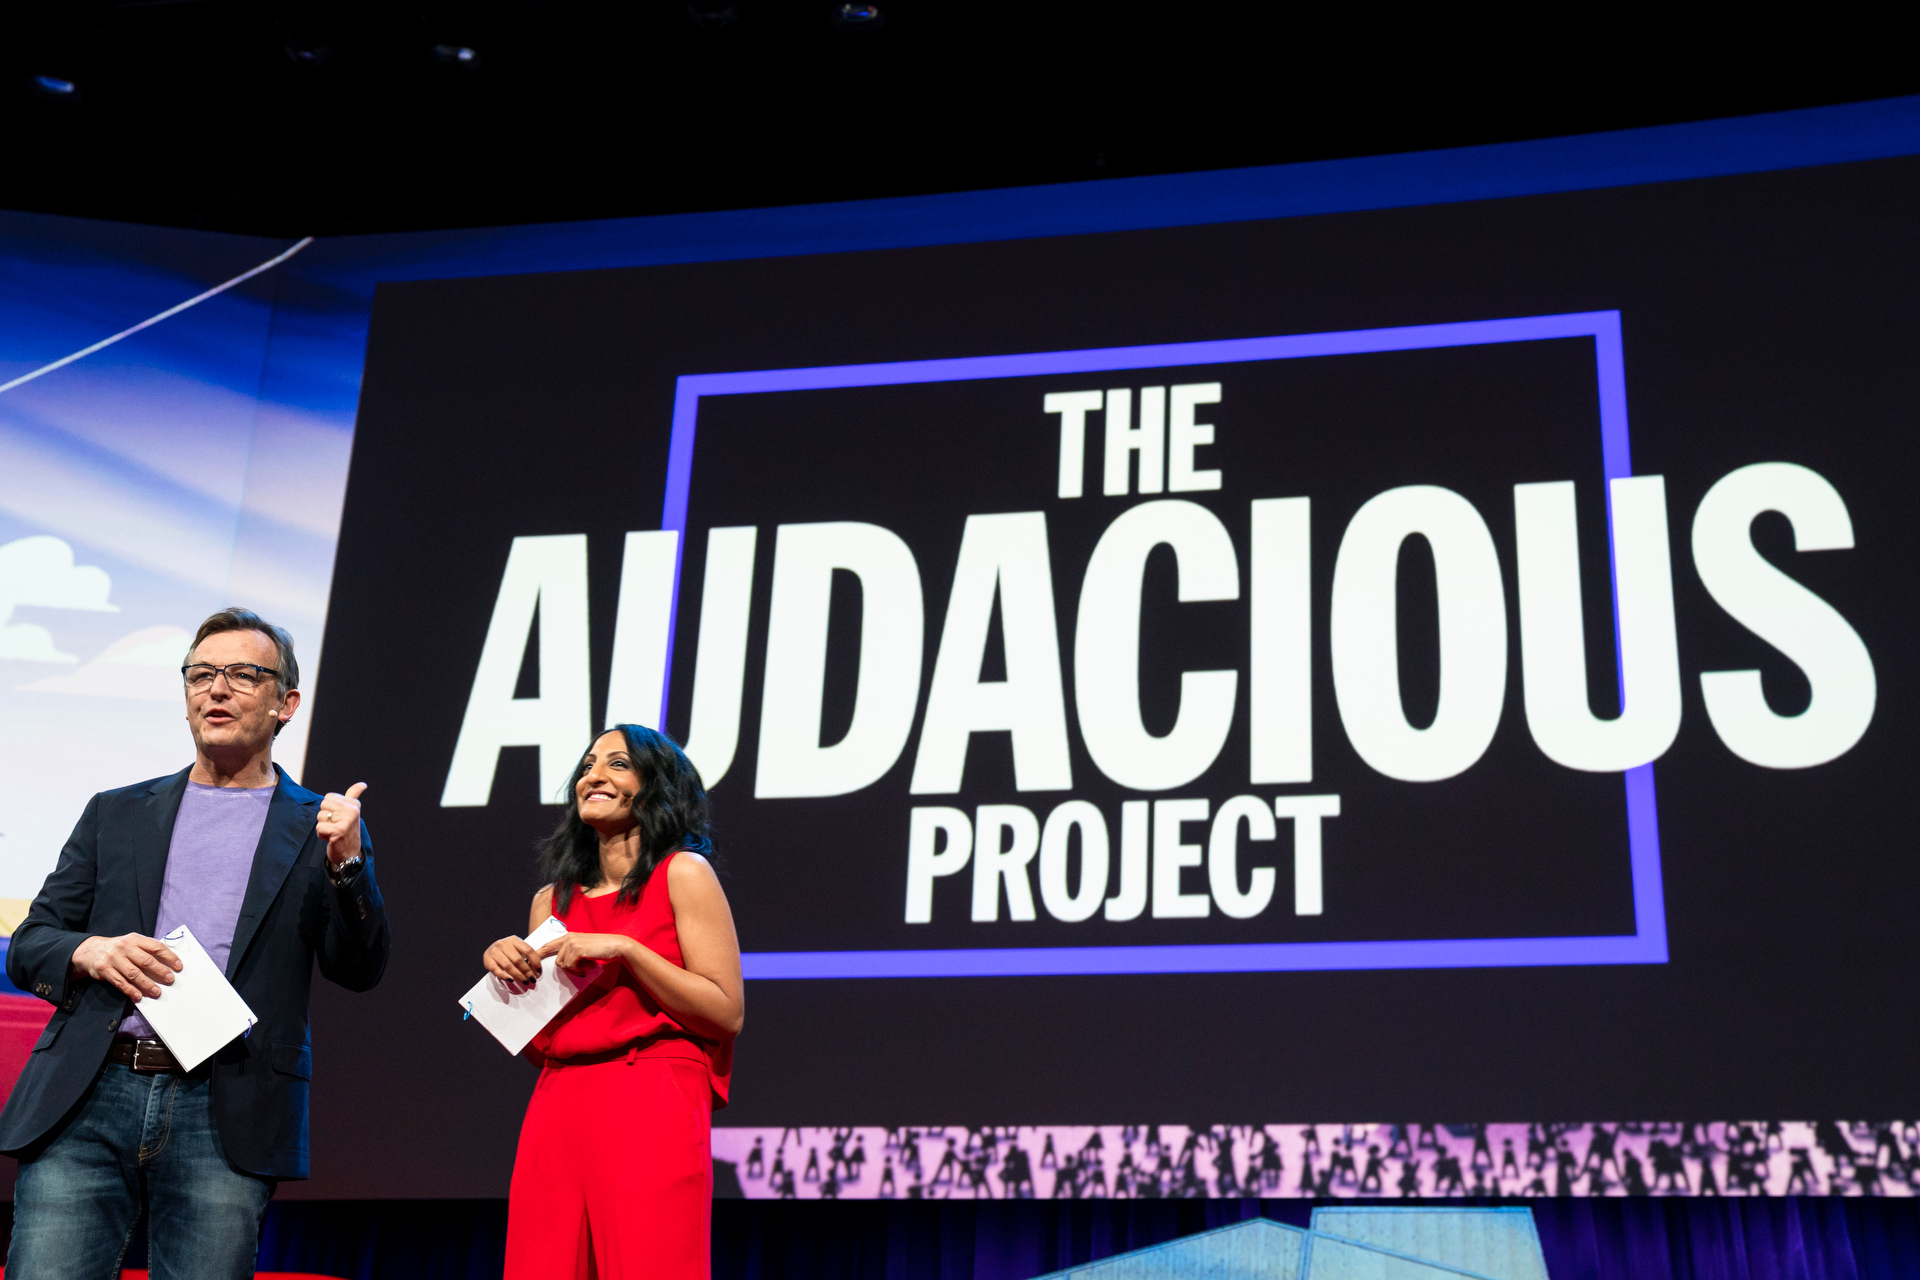 A behind-the-scenes view of TED2018, to inspire you to apply for The
Audacious Project